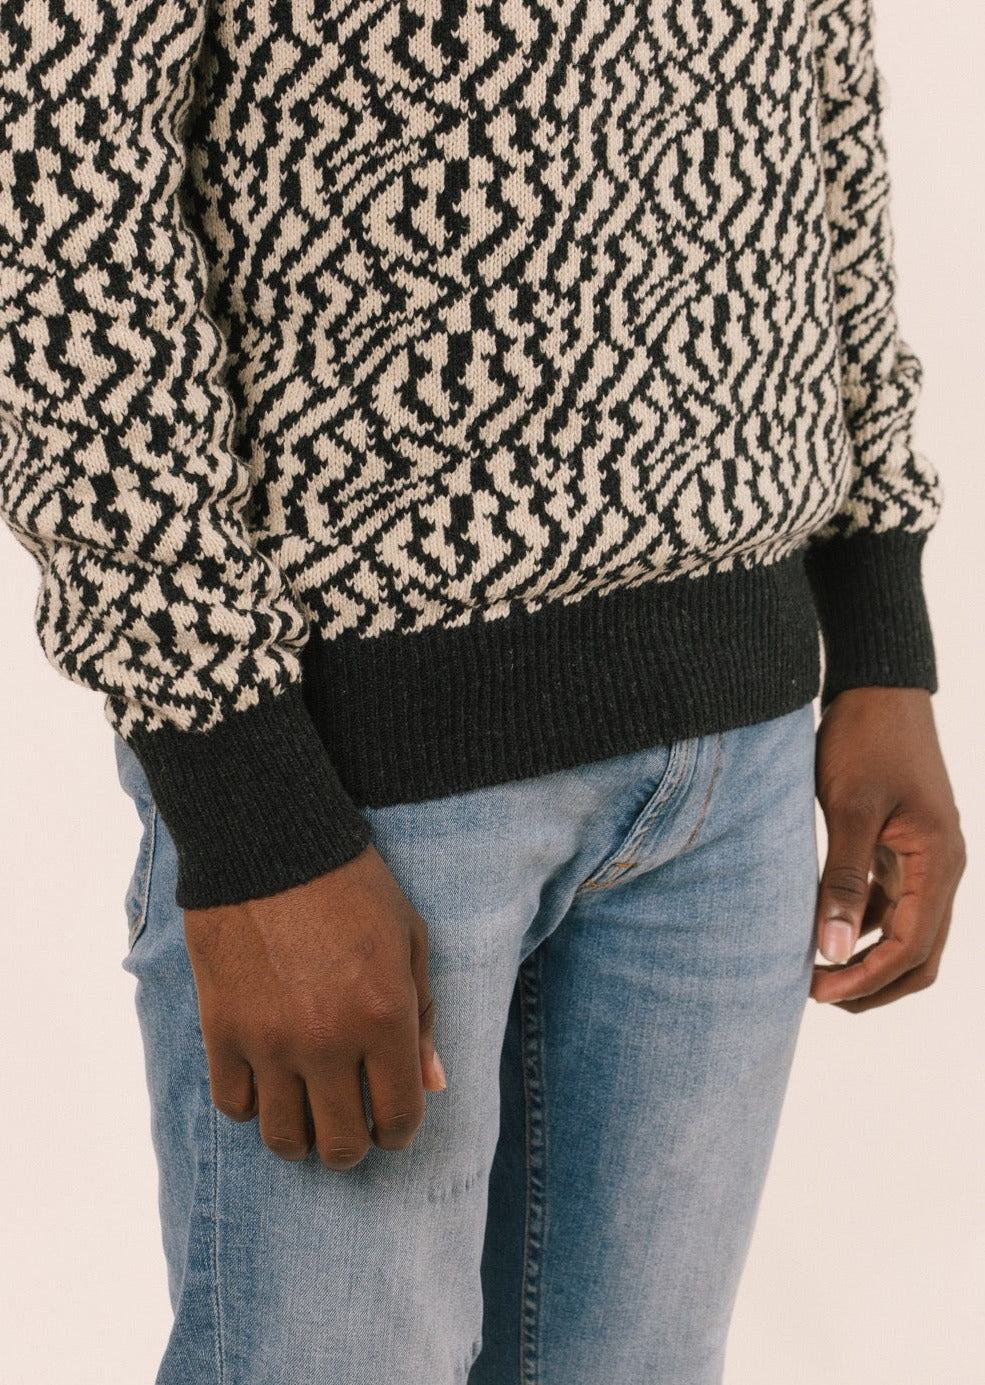 Detail of the sleeves of the sweater. The pattern or shape of the sweater is the basic one.